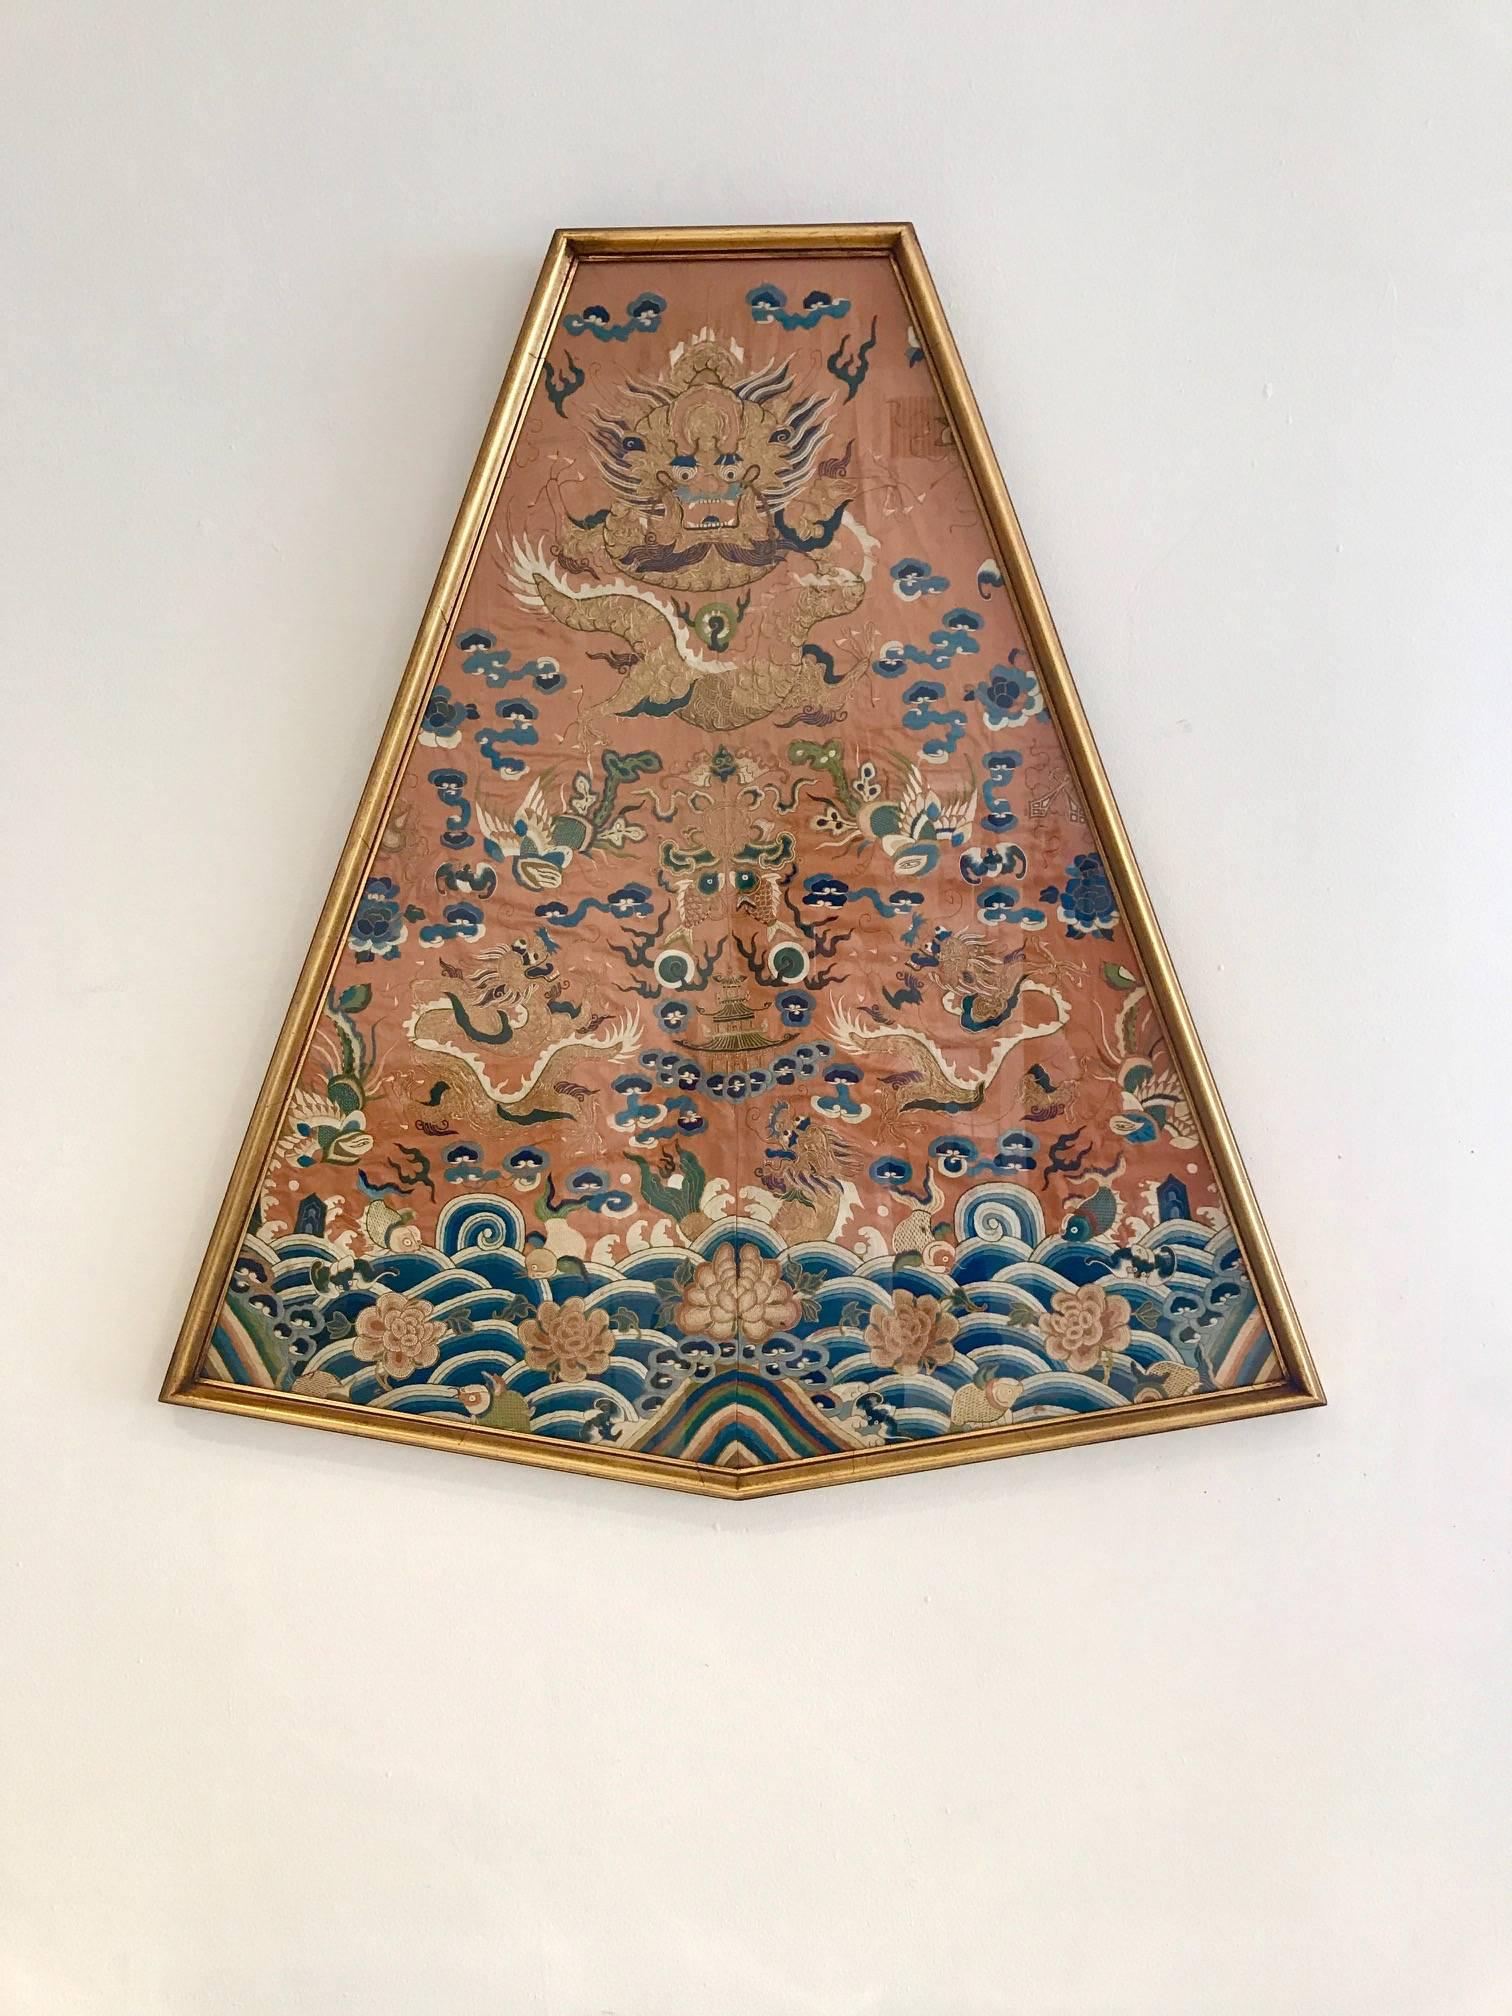 Framed large front fragment of Chinese imperial dragon robes, circa 19th century Qing dynasty. Artistically presented in diamond-shape gilt frame, each salmon in the silk background and elaborately hand-embroidered and stitched in silk and metallic